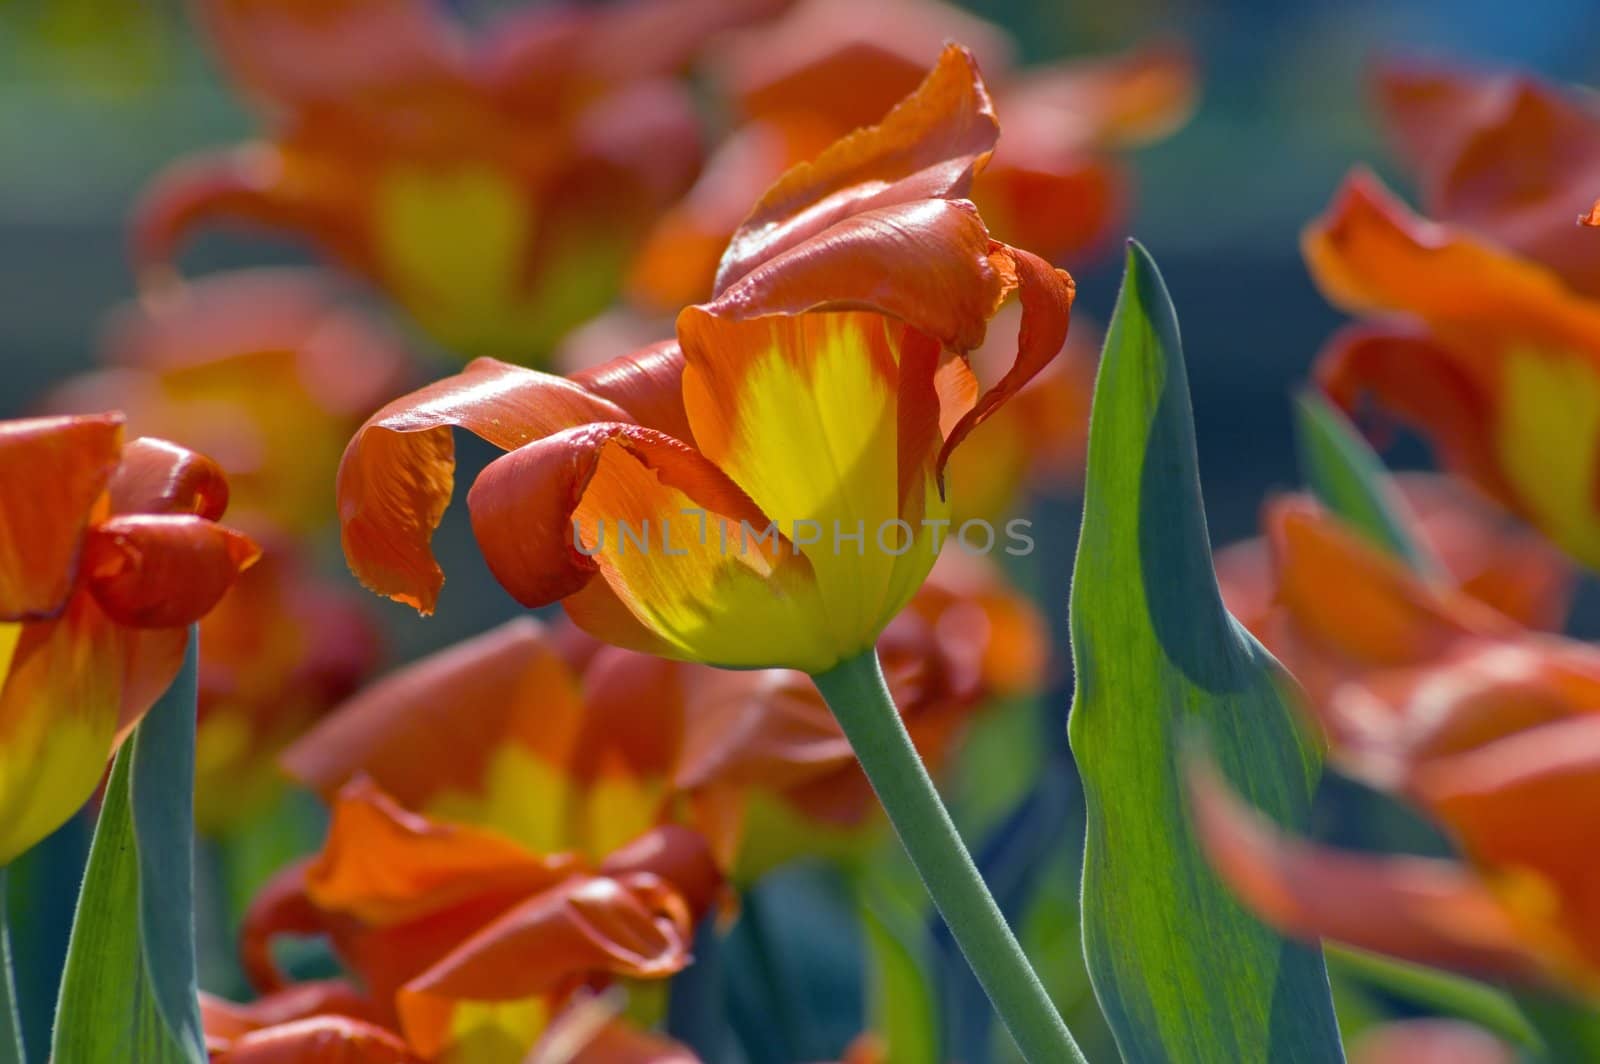 close up of red and yellow tulips at sunset